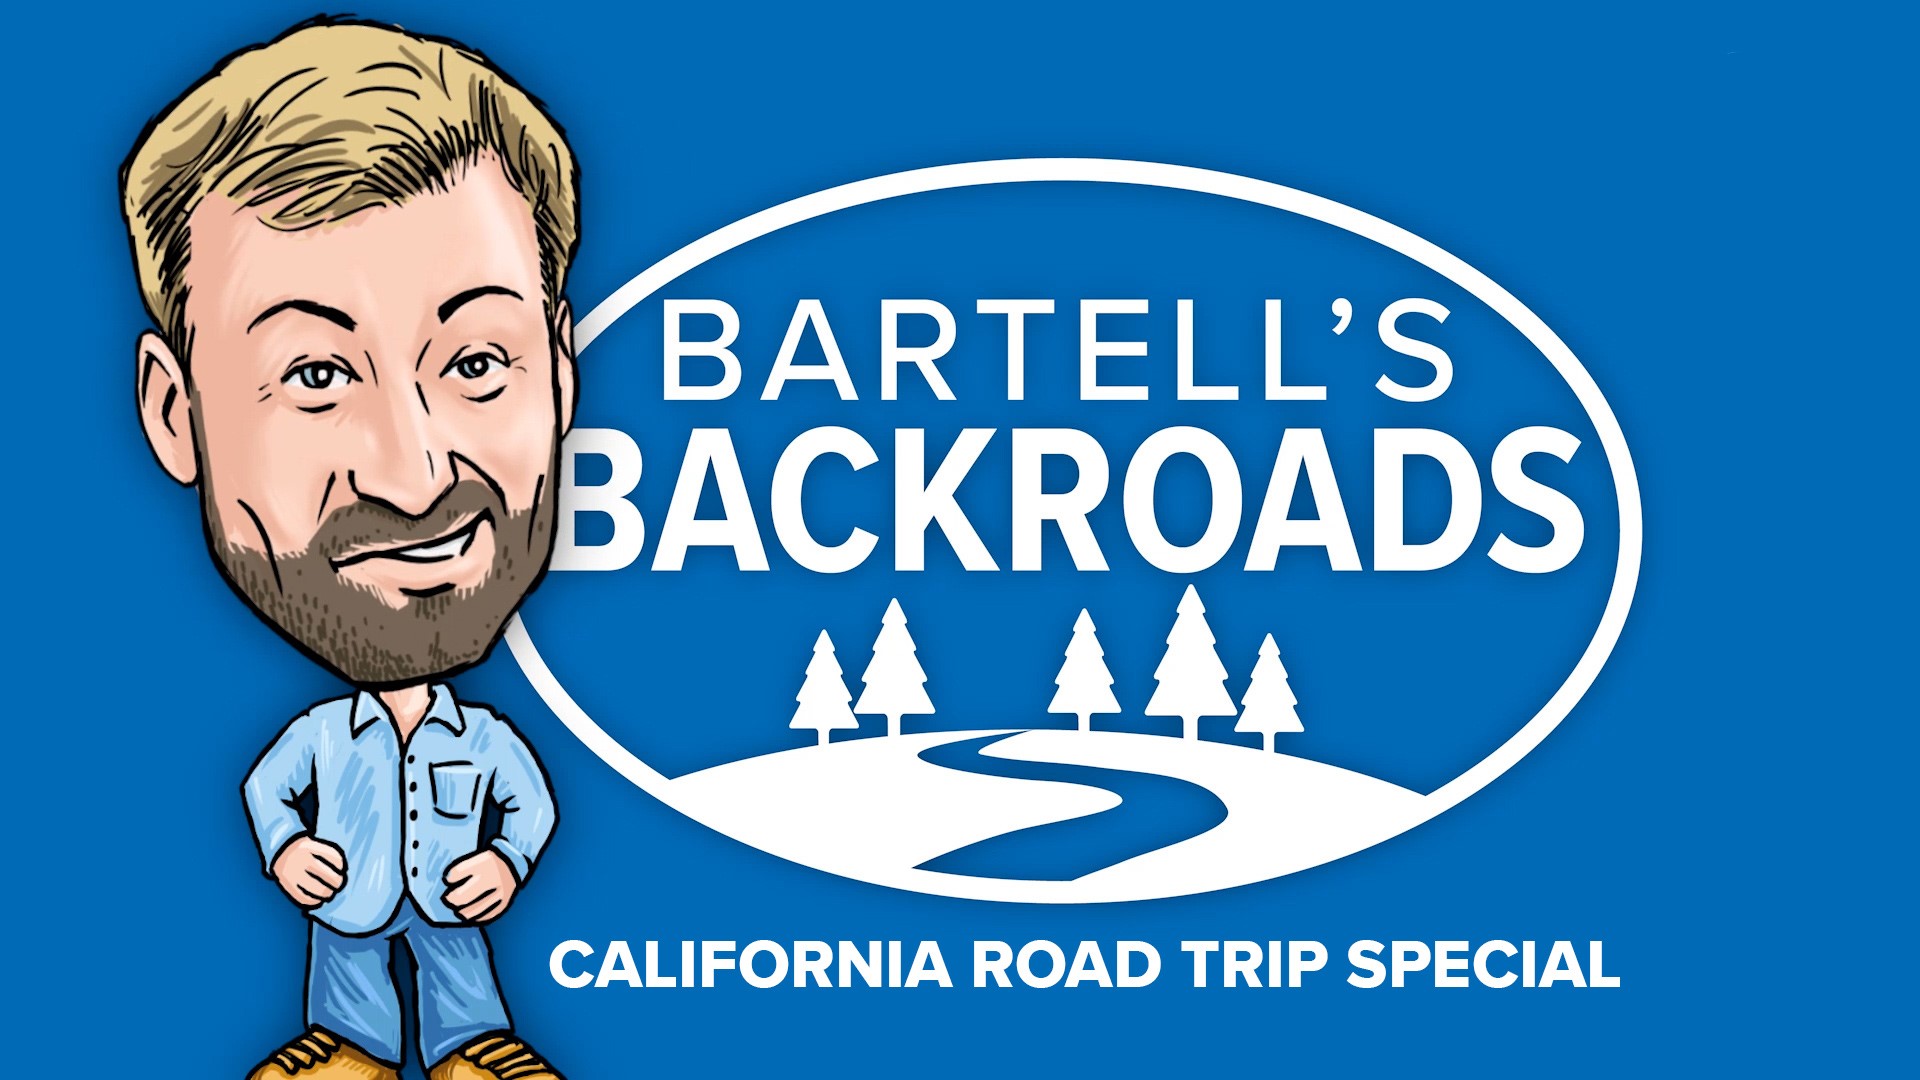 See some of John Bartell's favorite stories from all over California.